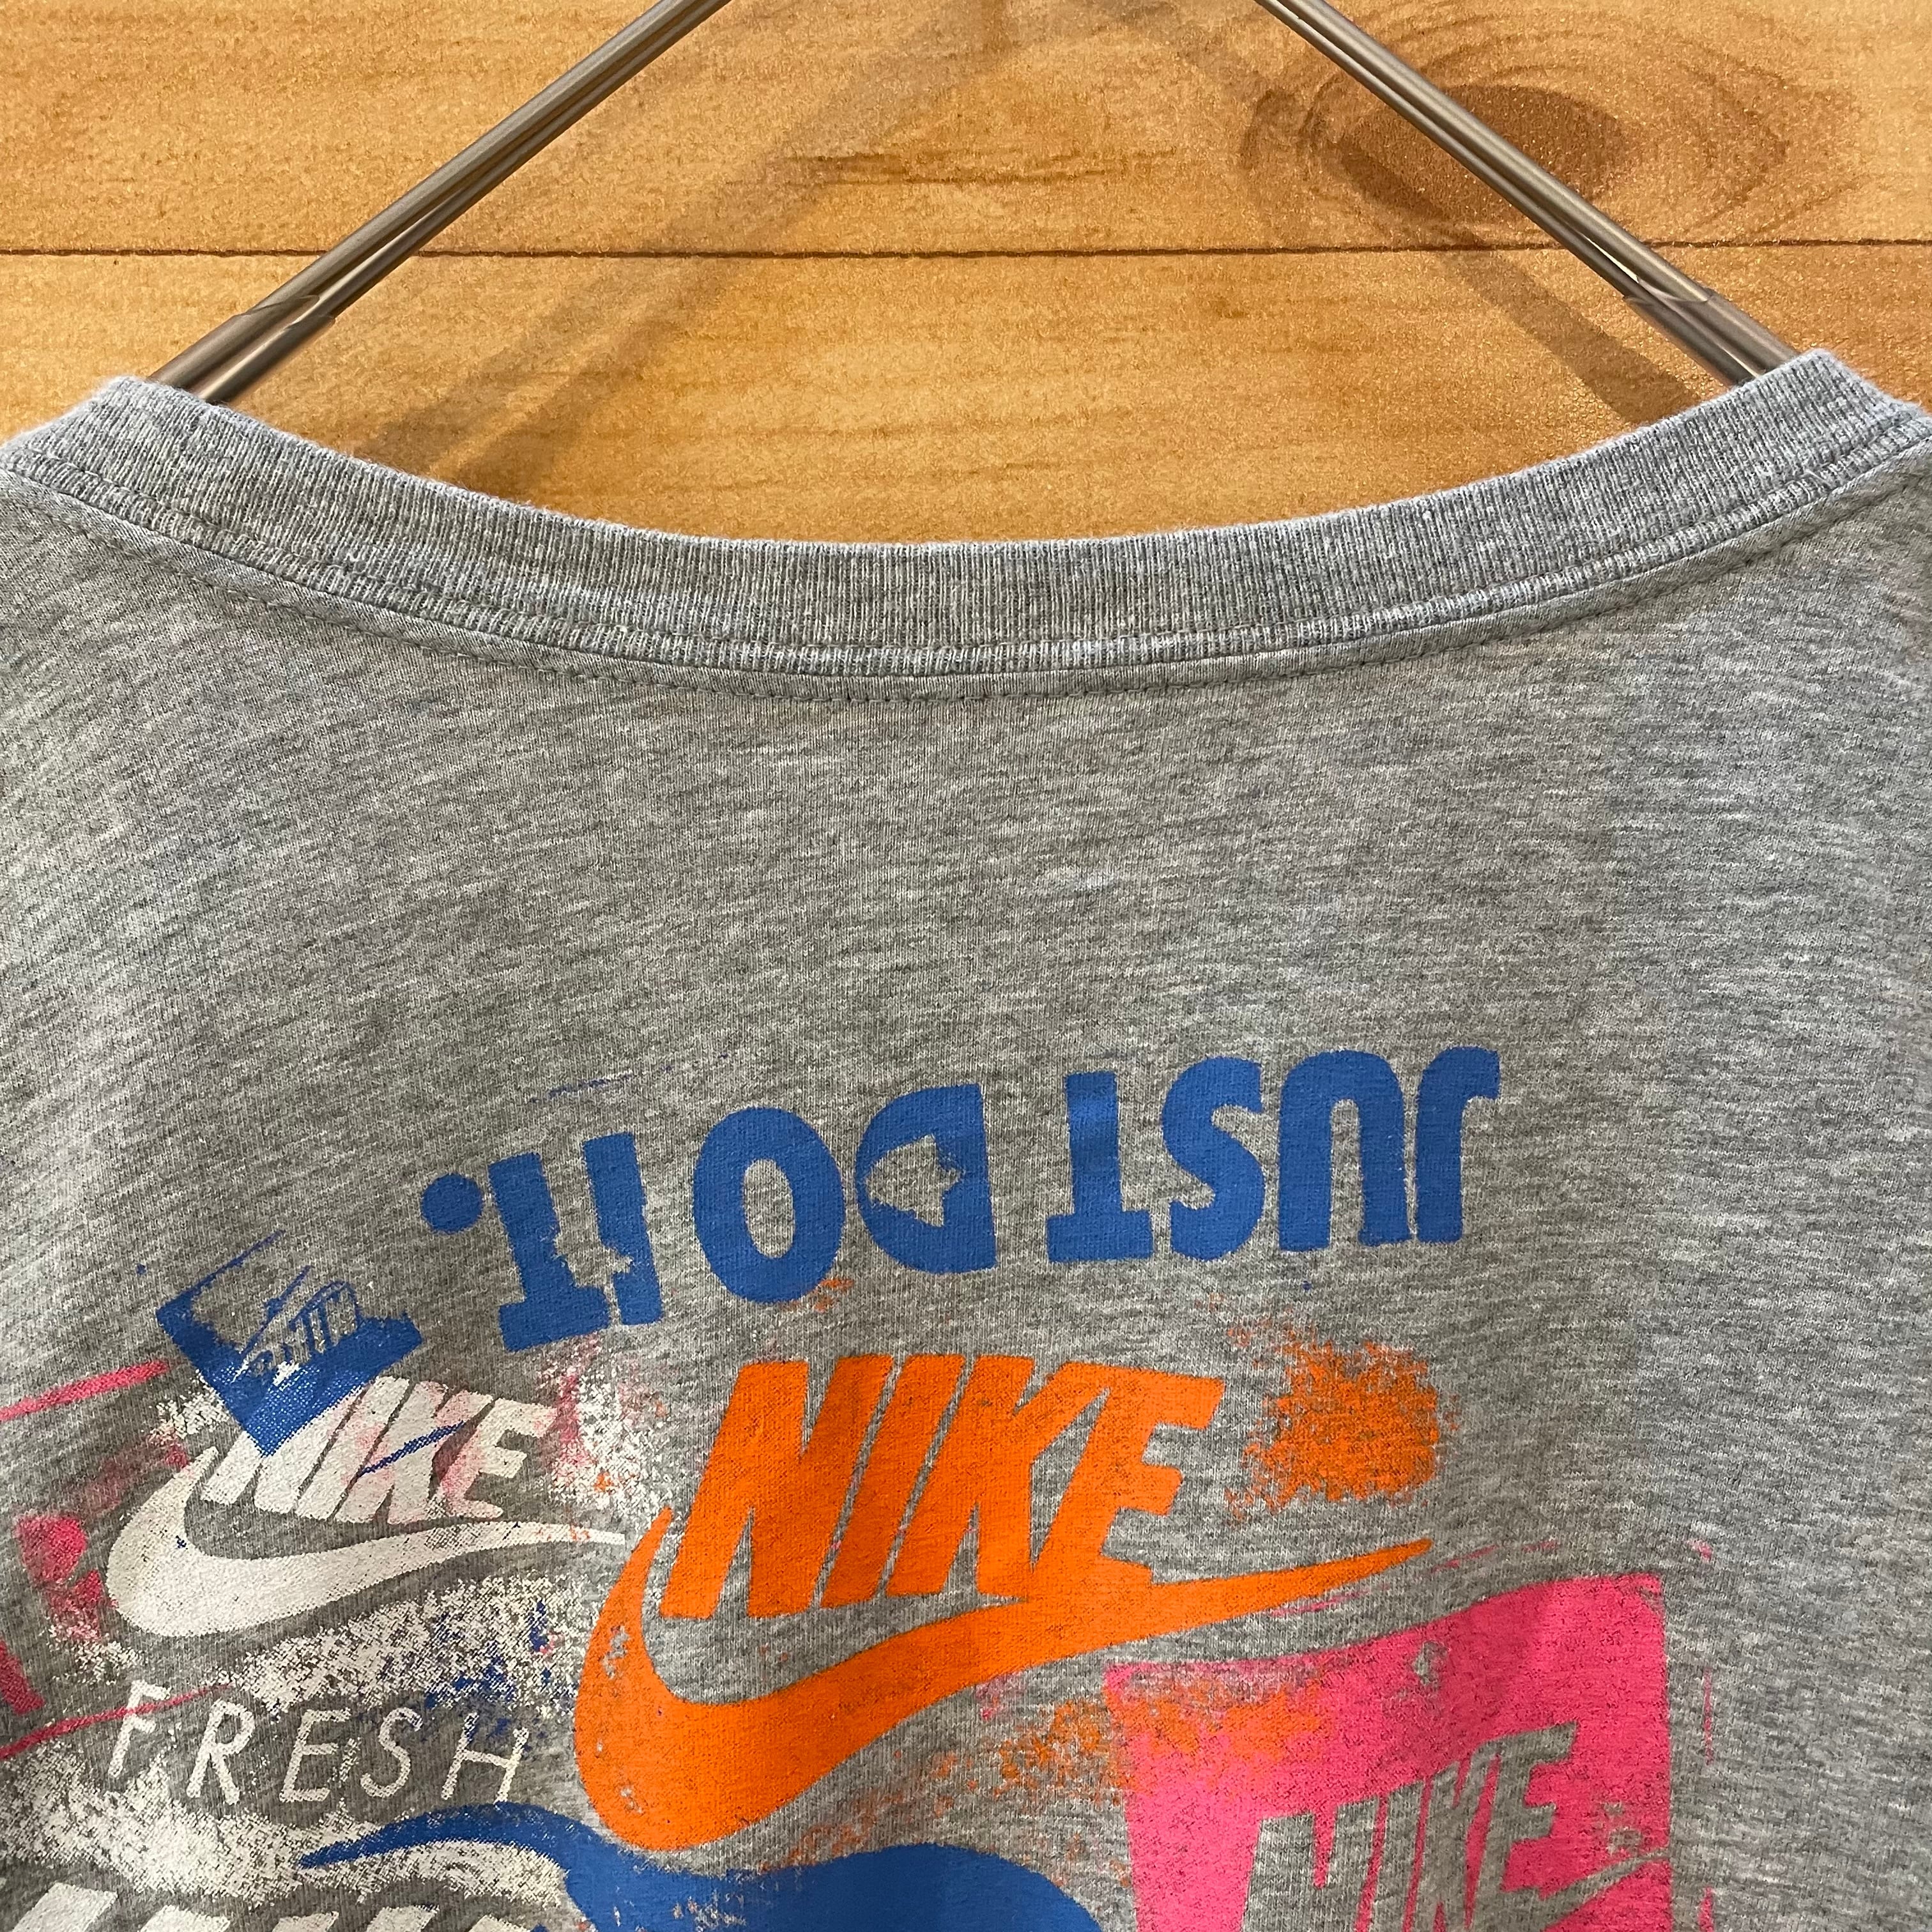 IKE made in USA Tee ナイキ Tシャツ アメリカ製 XXL